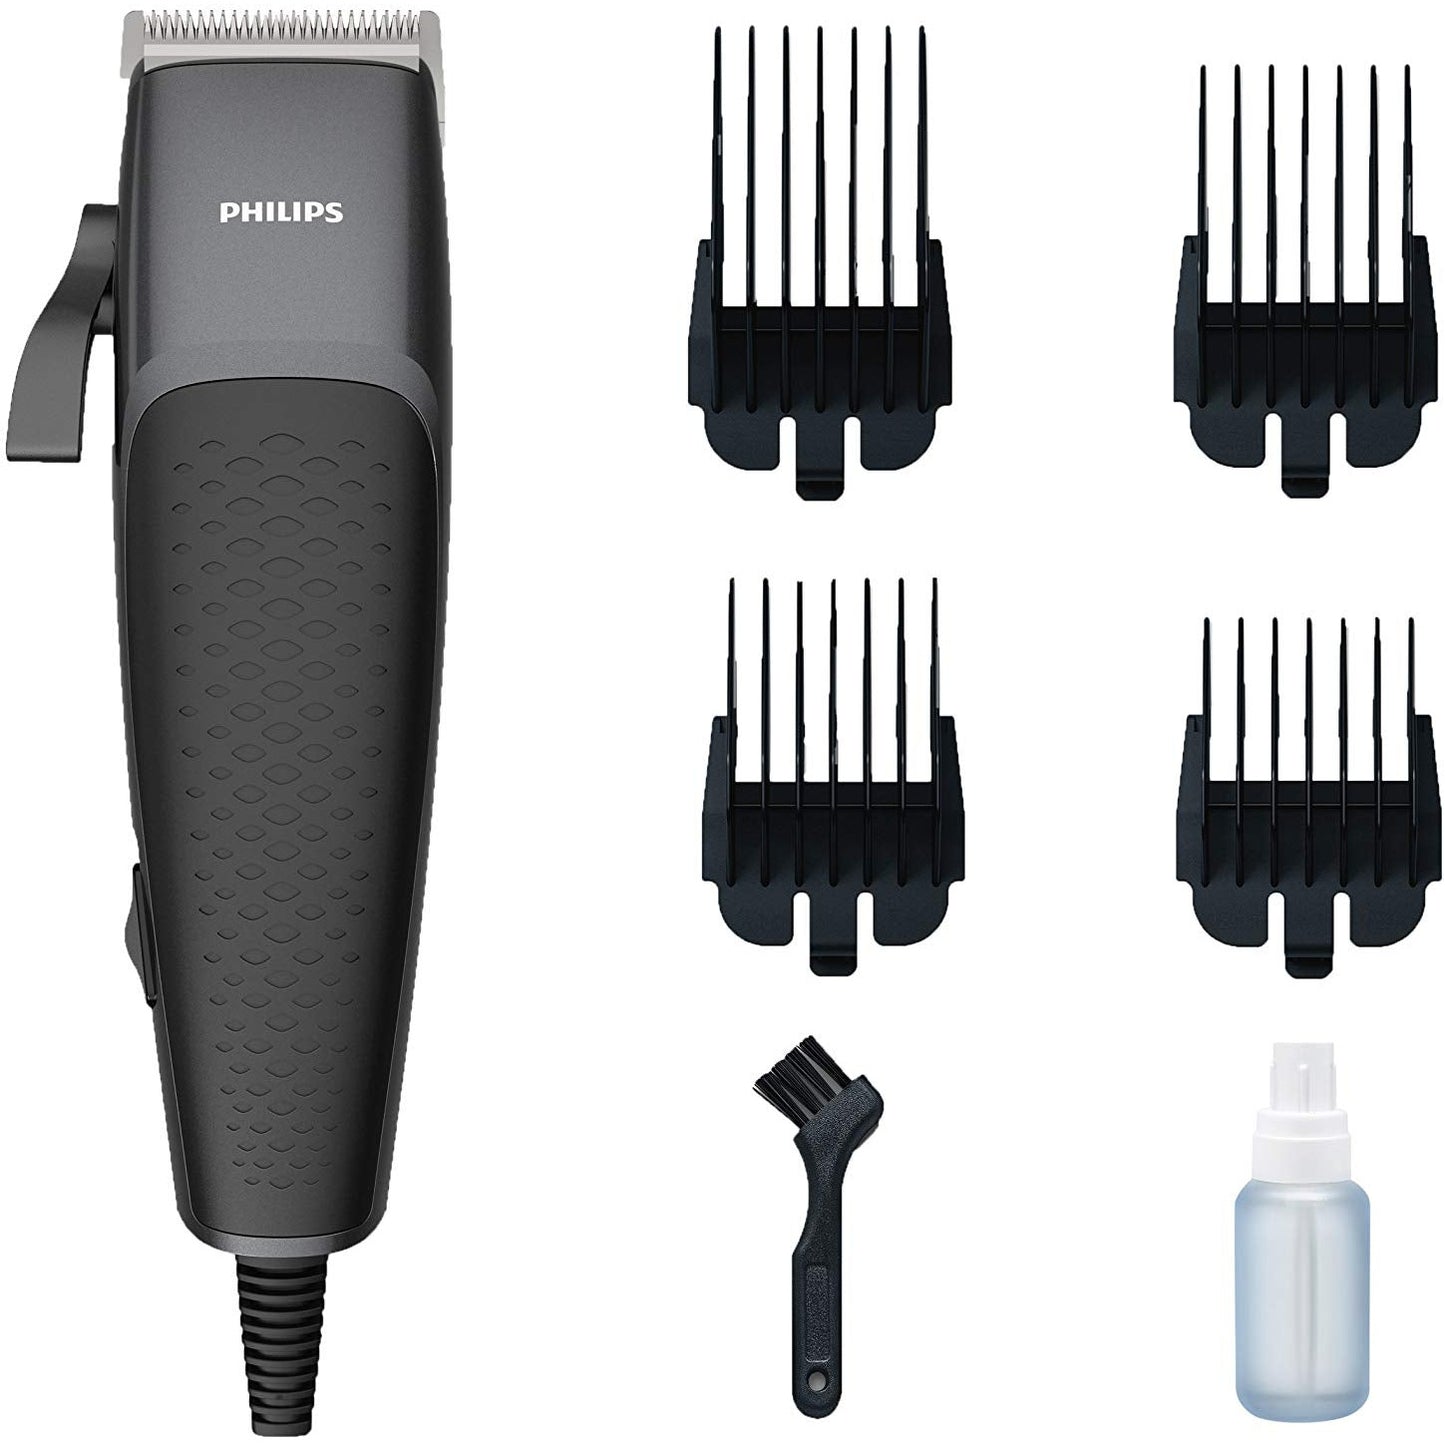 PHILIPS HC3100 HAIR CLIIPER COPPER MOTOR COIL STEEL BLADES 4CLICK-ON COMBS